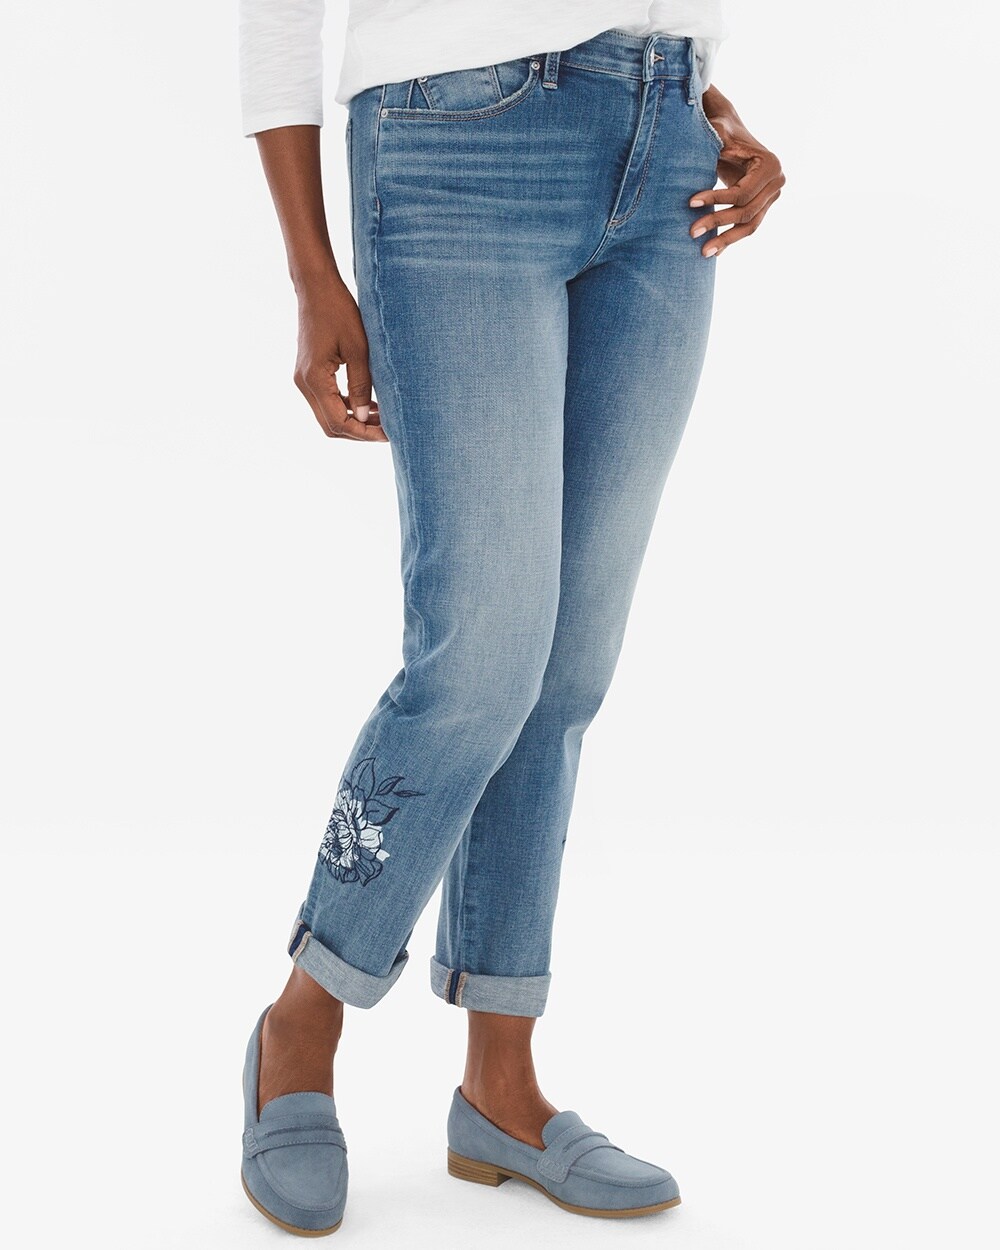 Floral-Embroidered Boyfriend Ankle Jeans